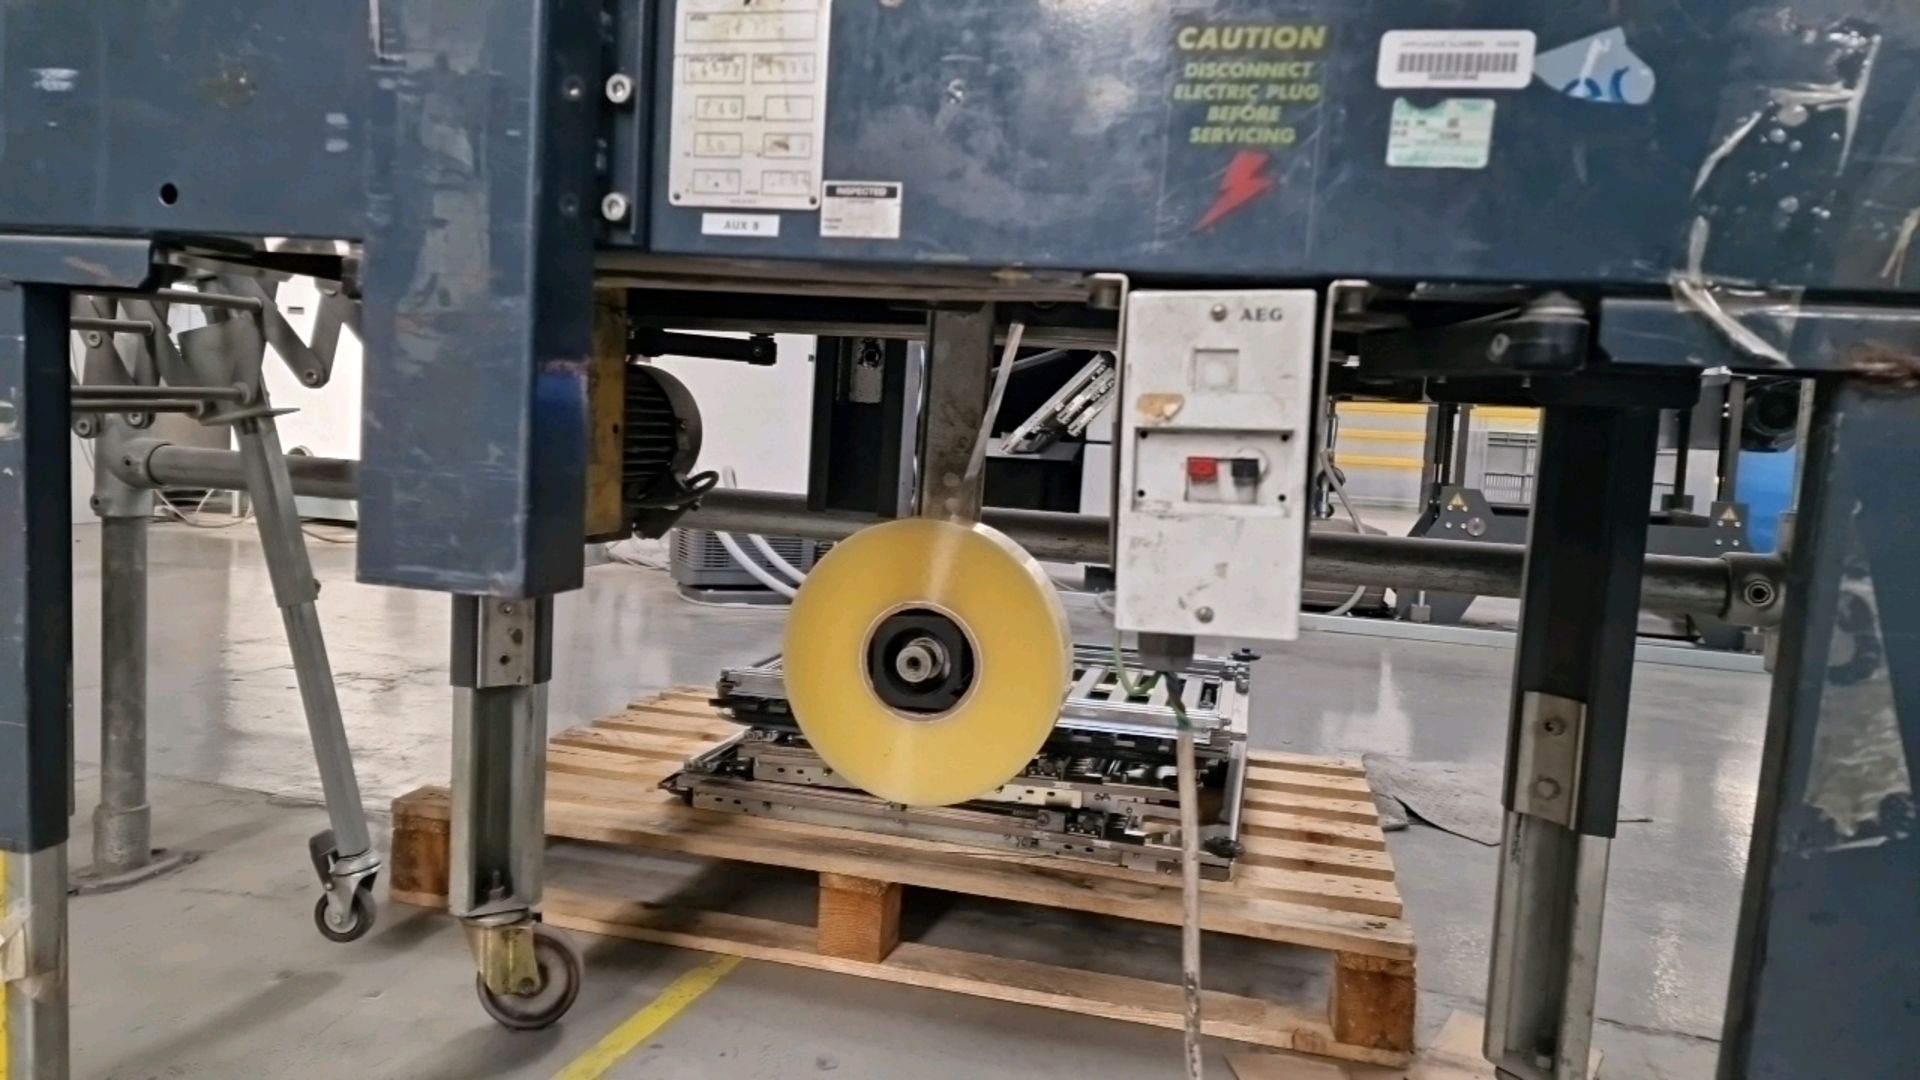 1994 Siat Packaging Machine - Image 8 of 10